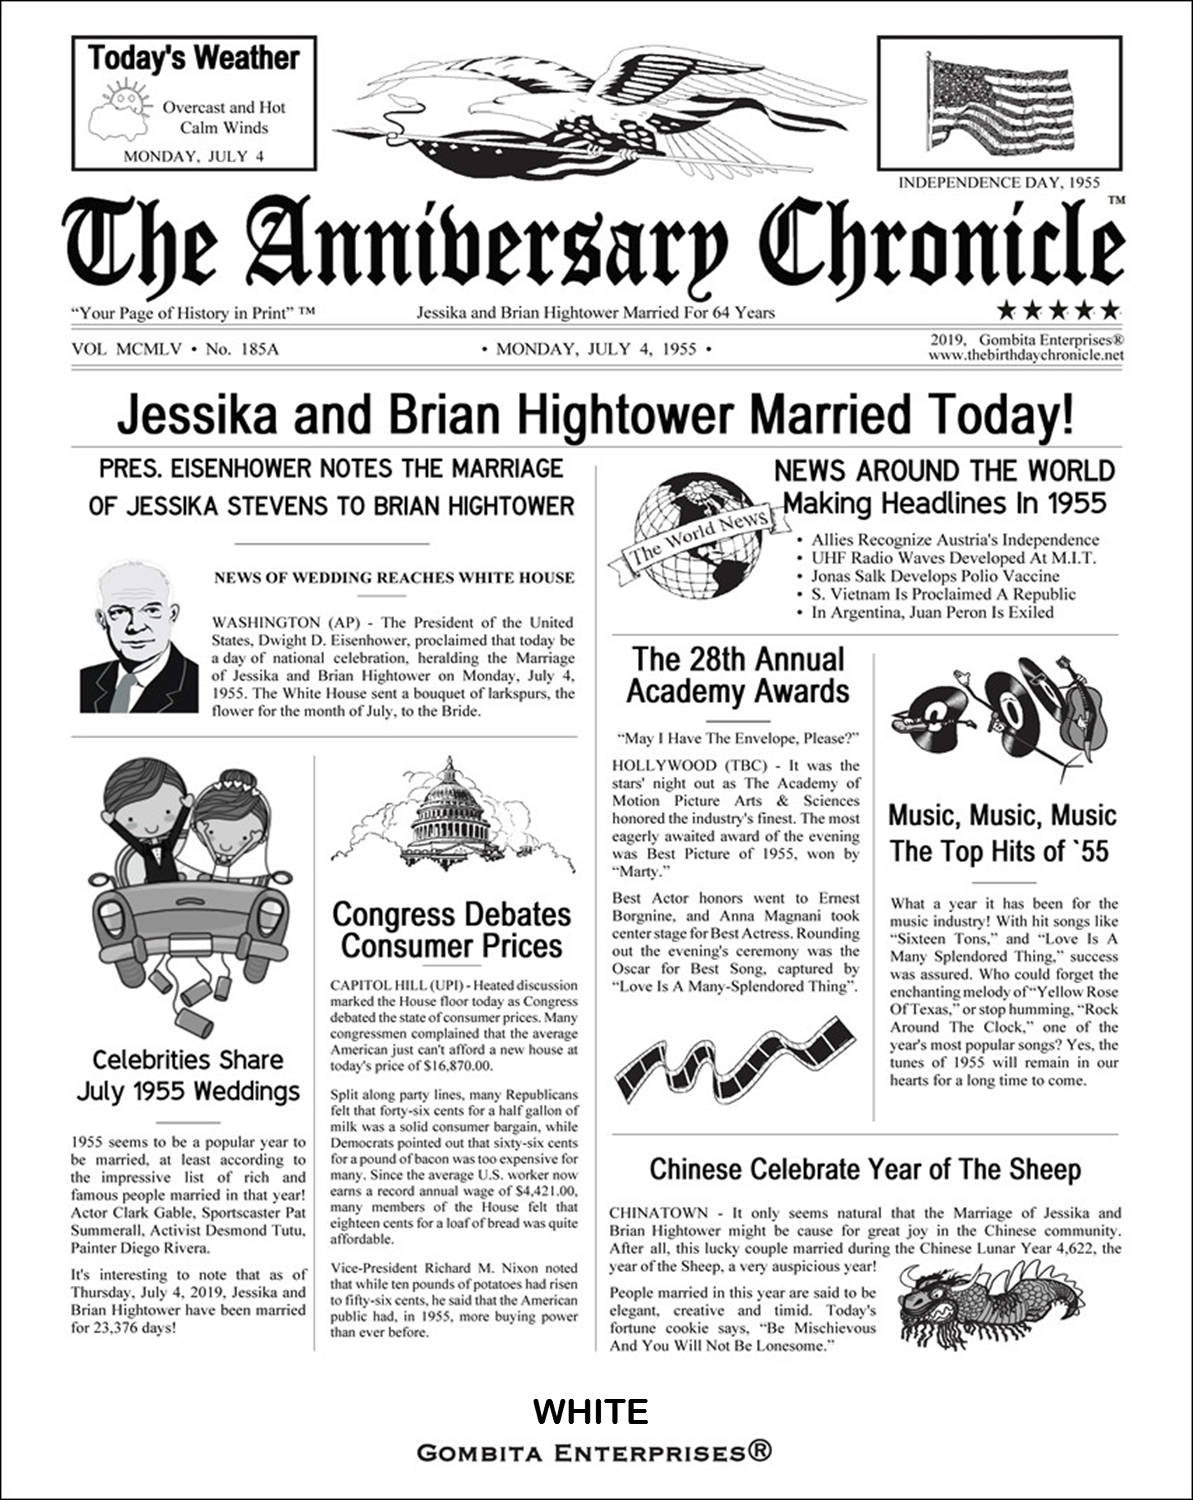 11 x 14 Inch By Mail - The Anniversary Chronicle